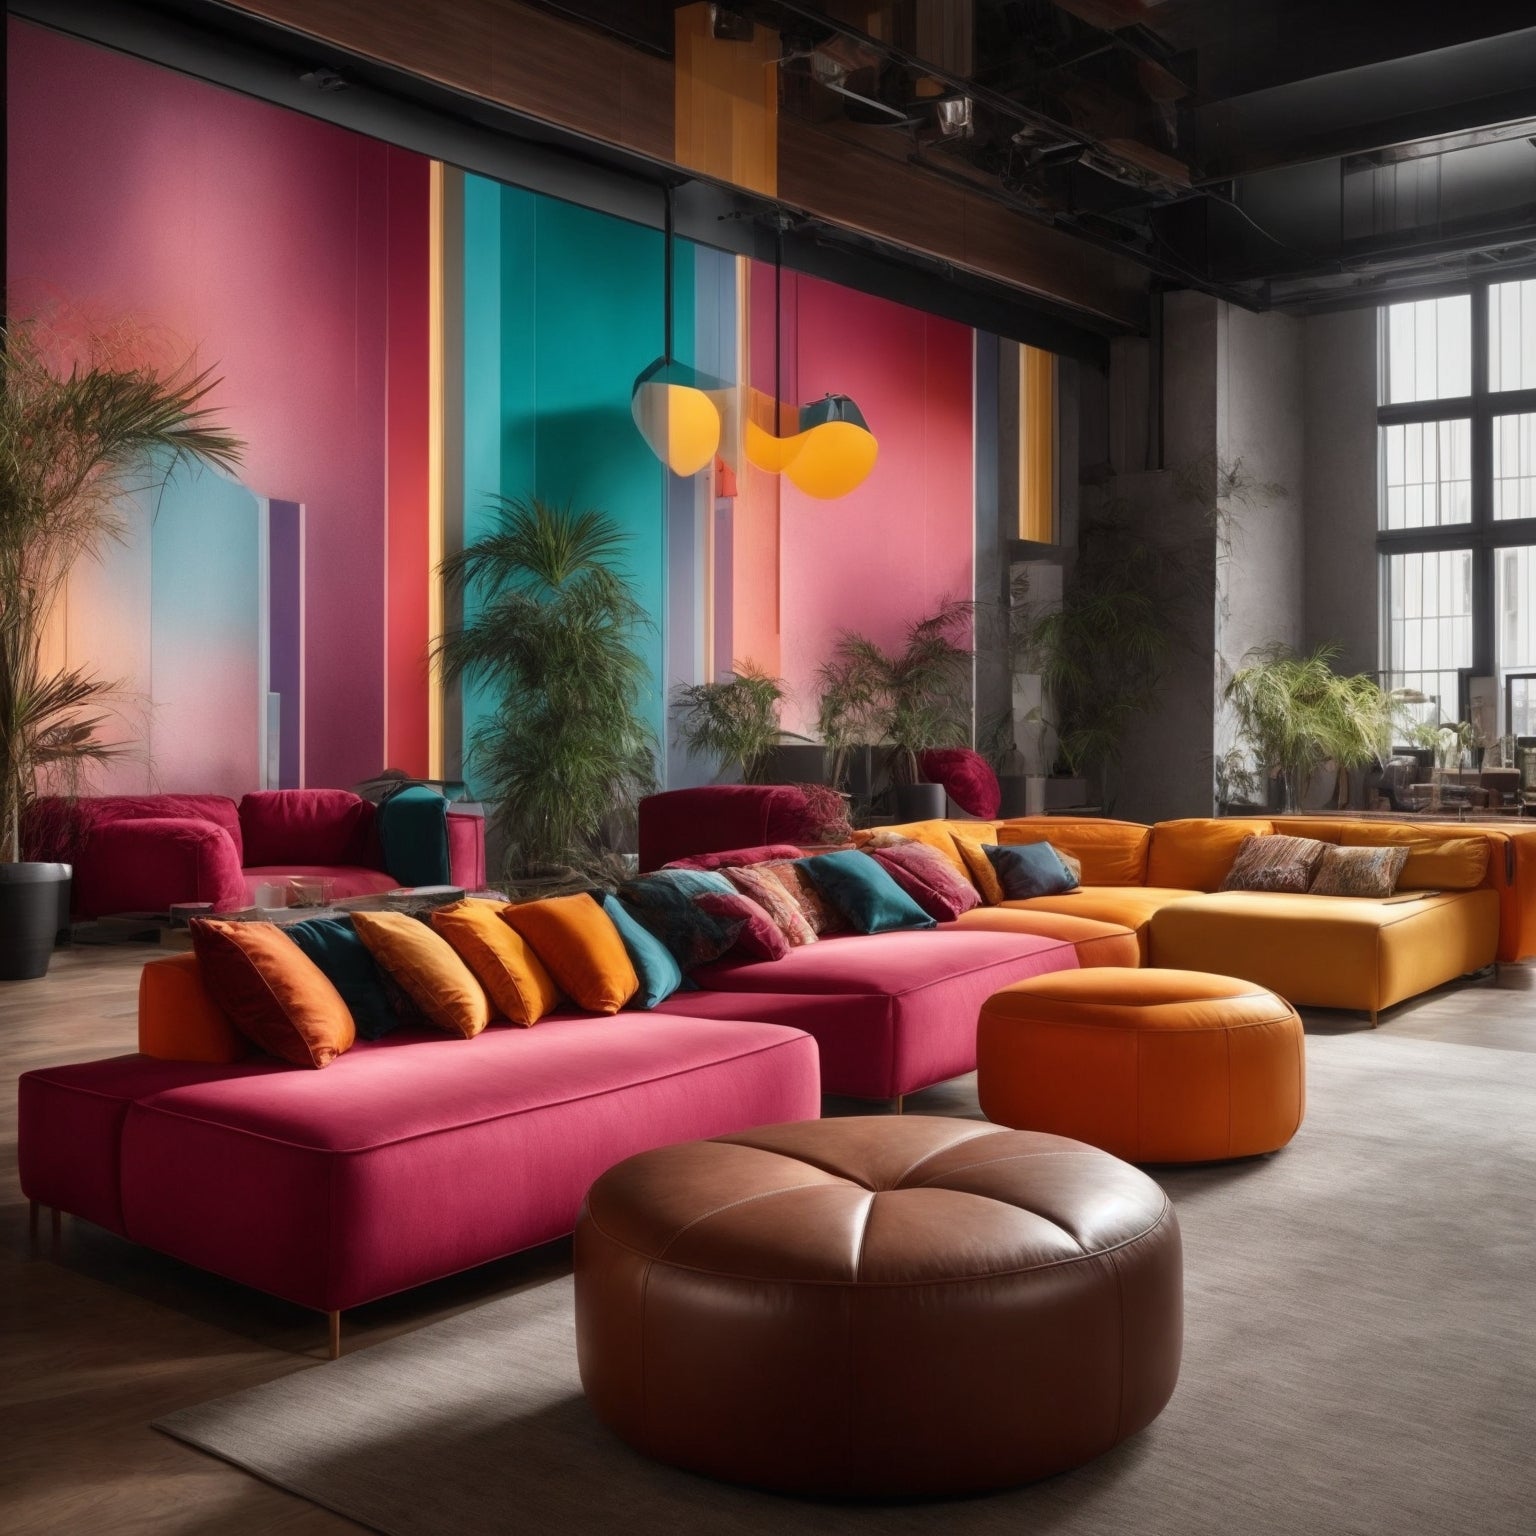 Customization and Personalization: Place Cube Couches for Yourself